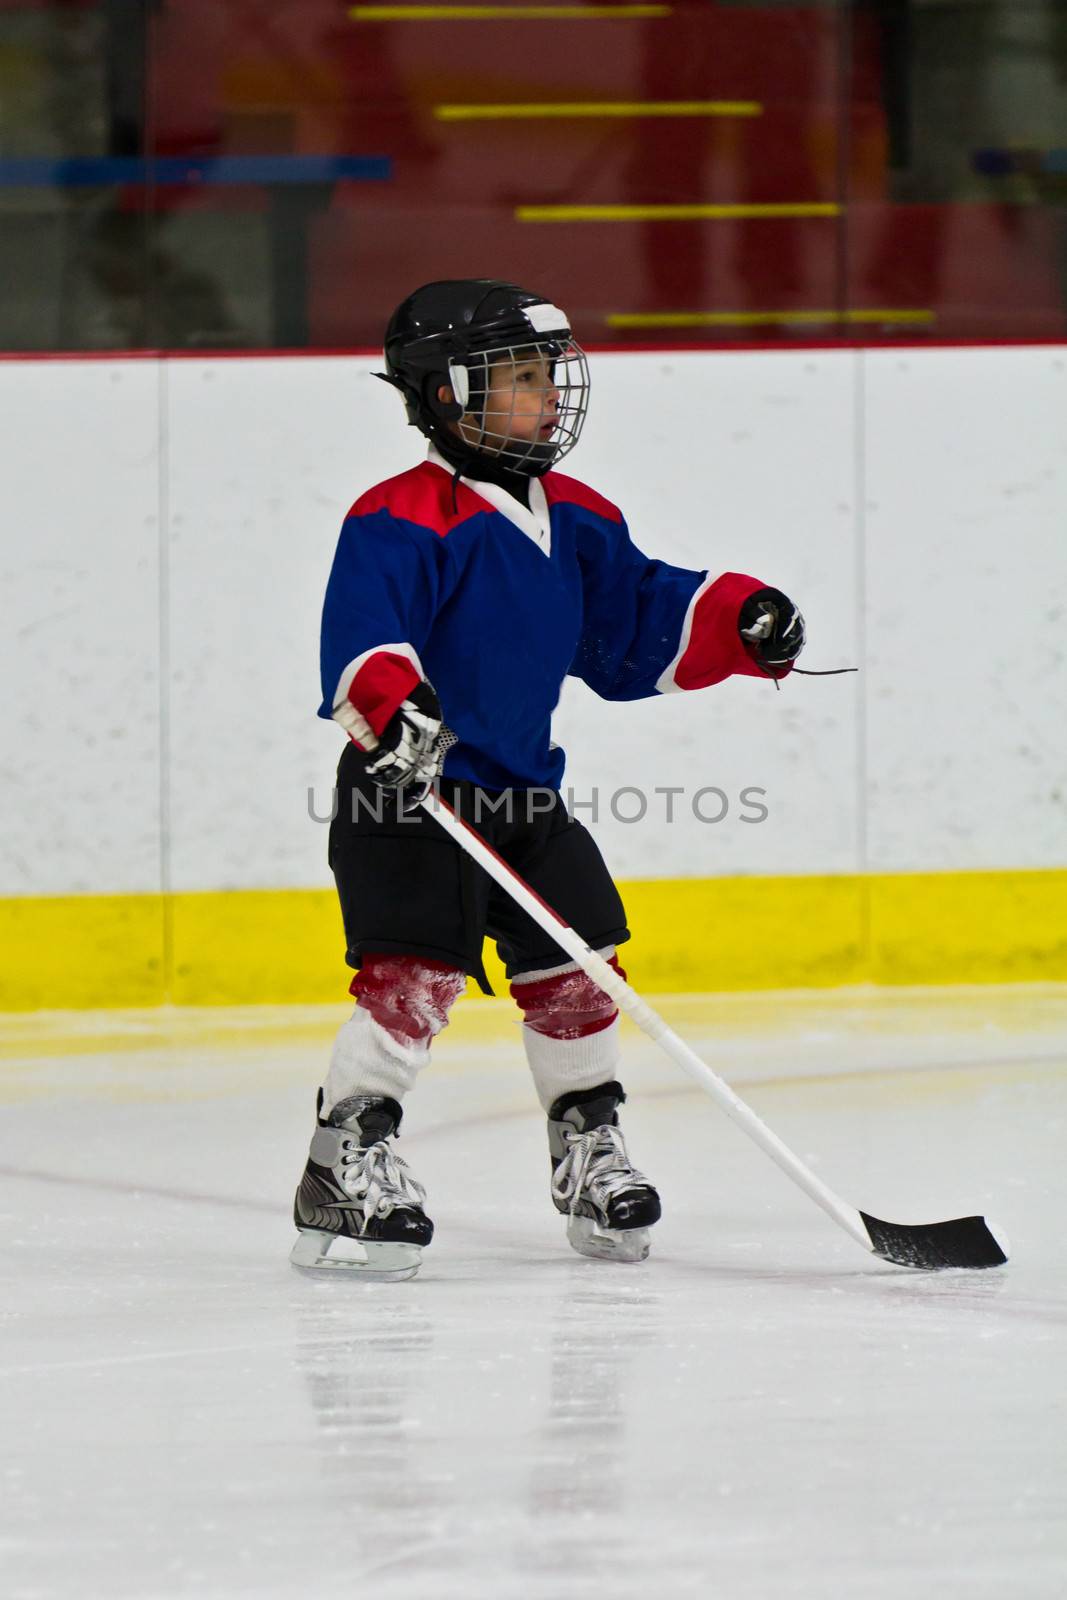 Child practicing ice skating and hockey by bigjohn36